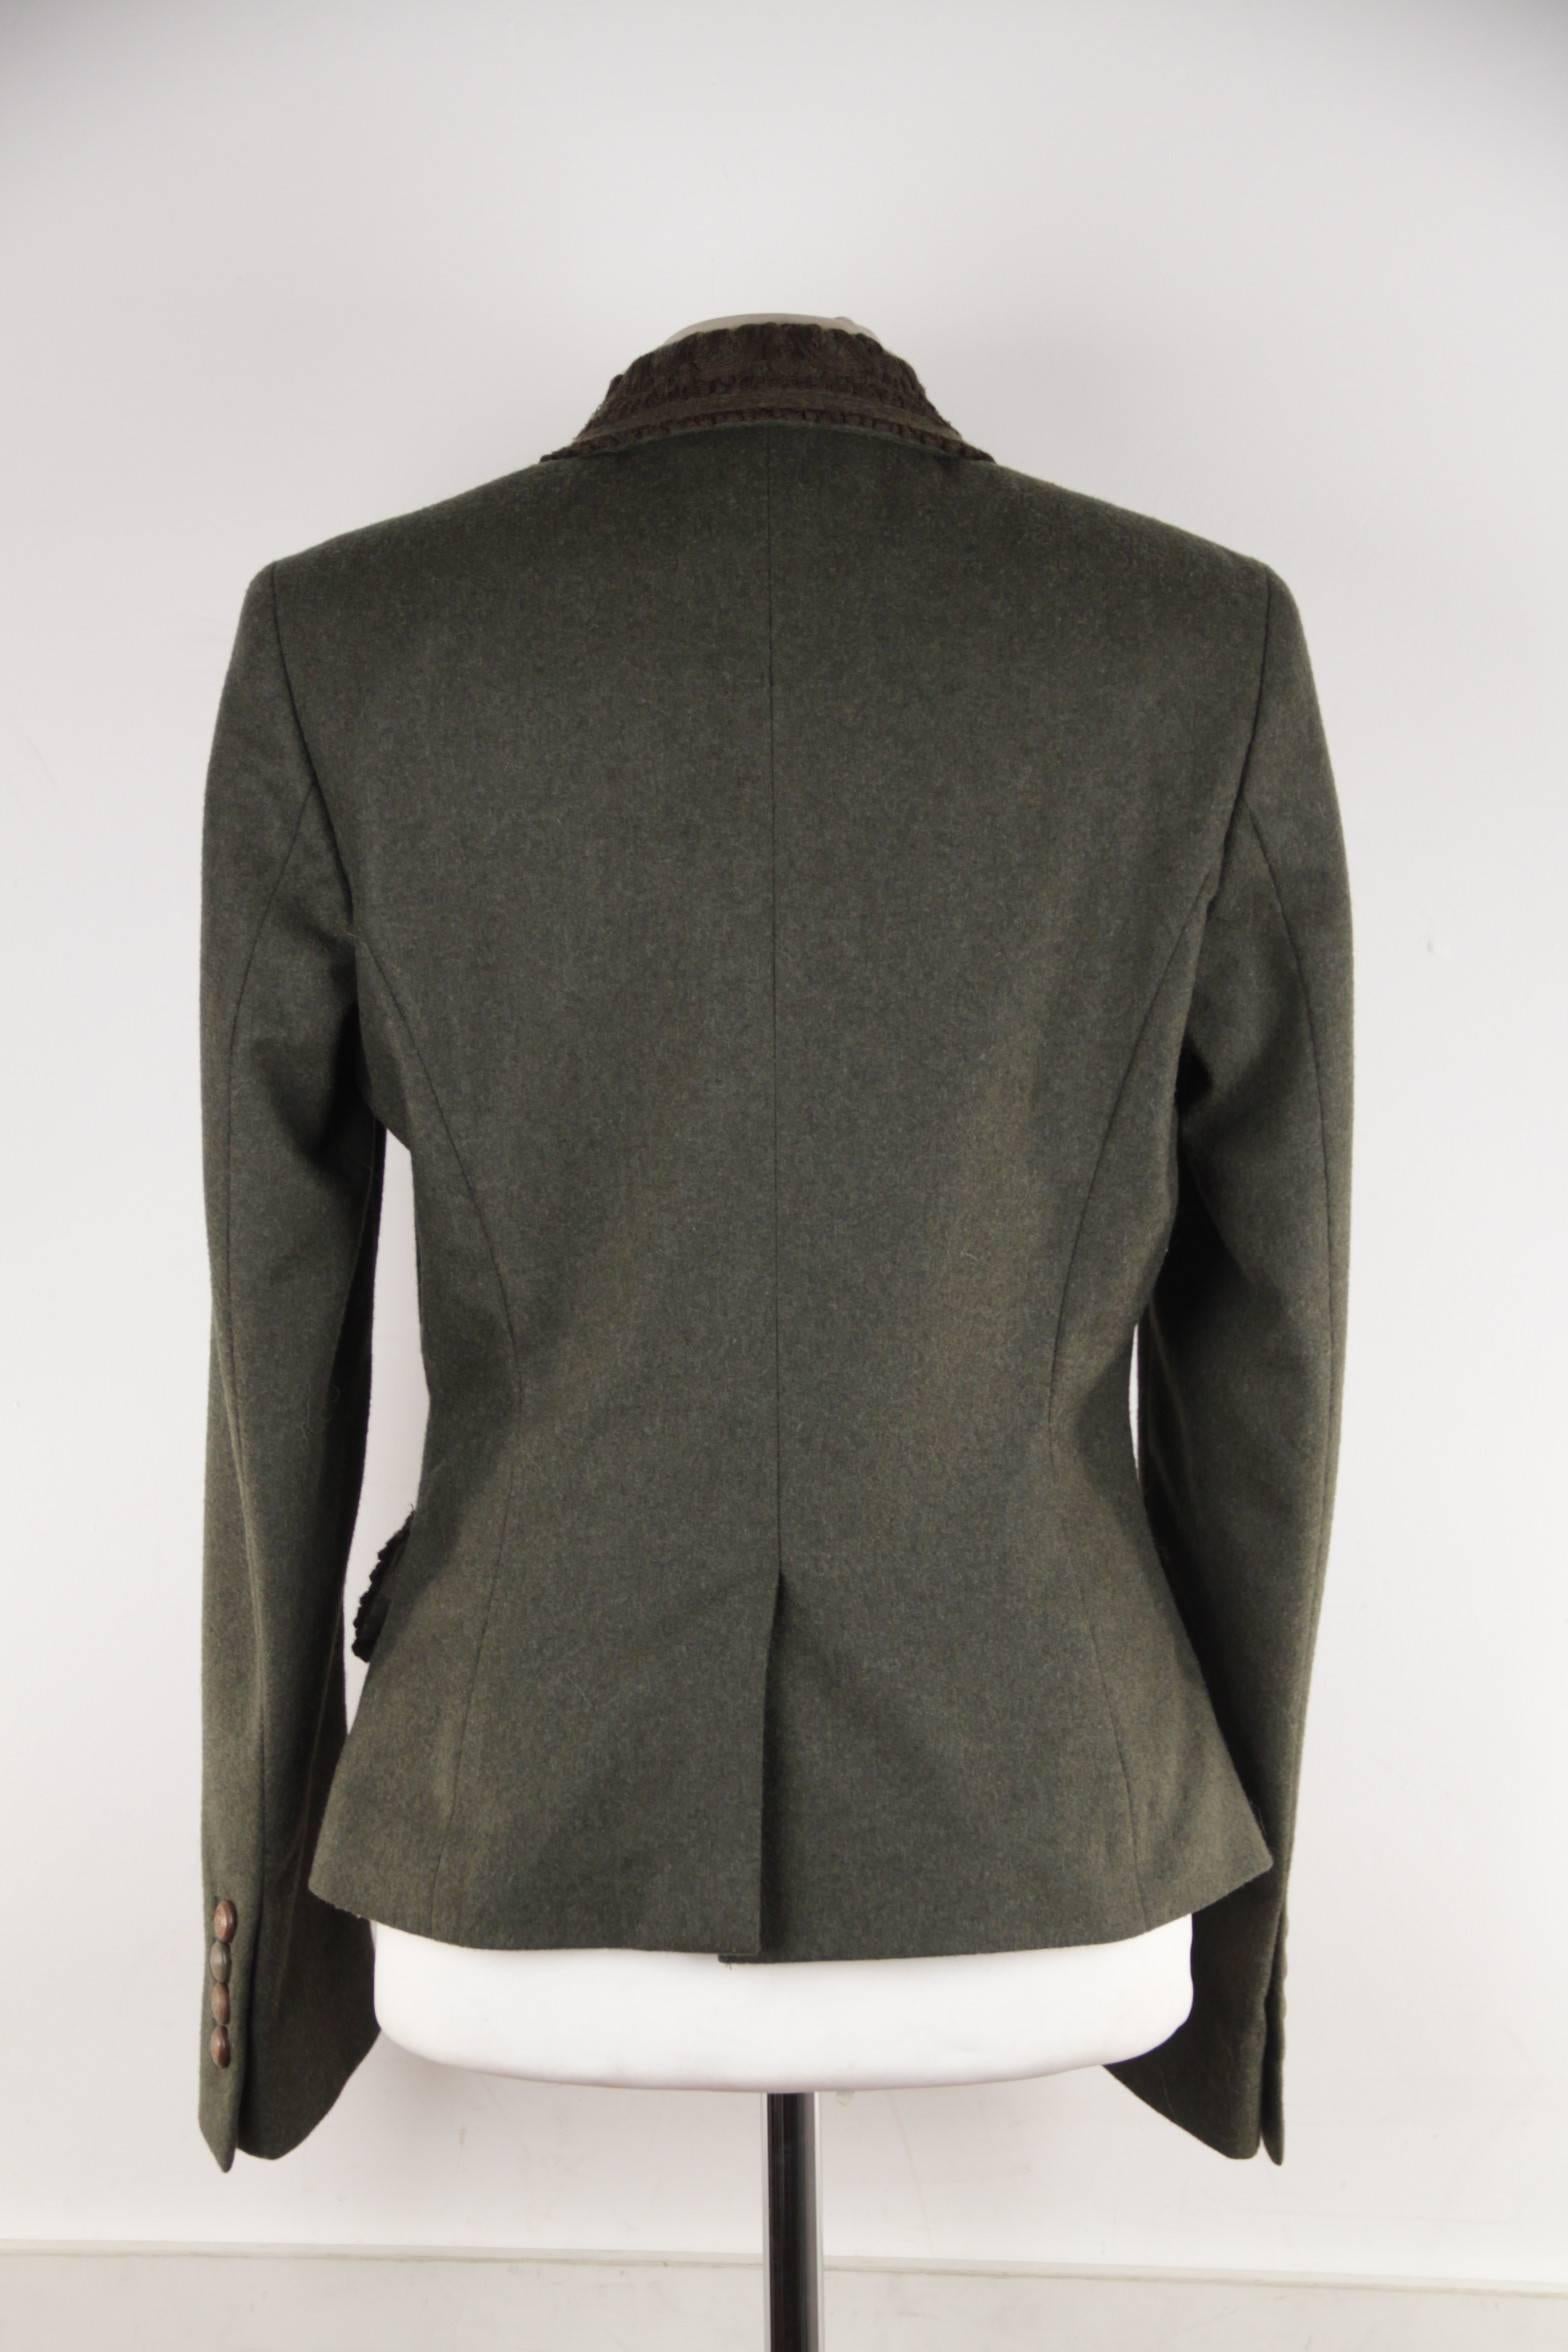 ERMANNO SCERVINO Military Green LODEN Wool Jacket w/ Embroidery SZ 44 IT 2